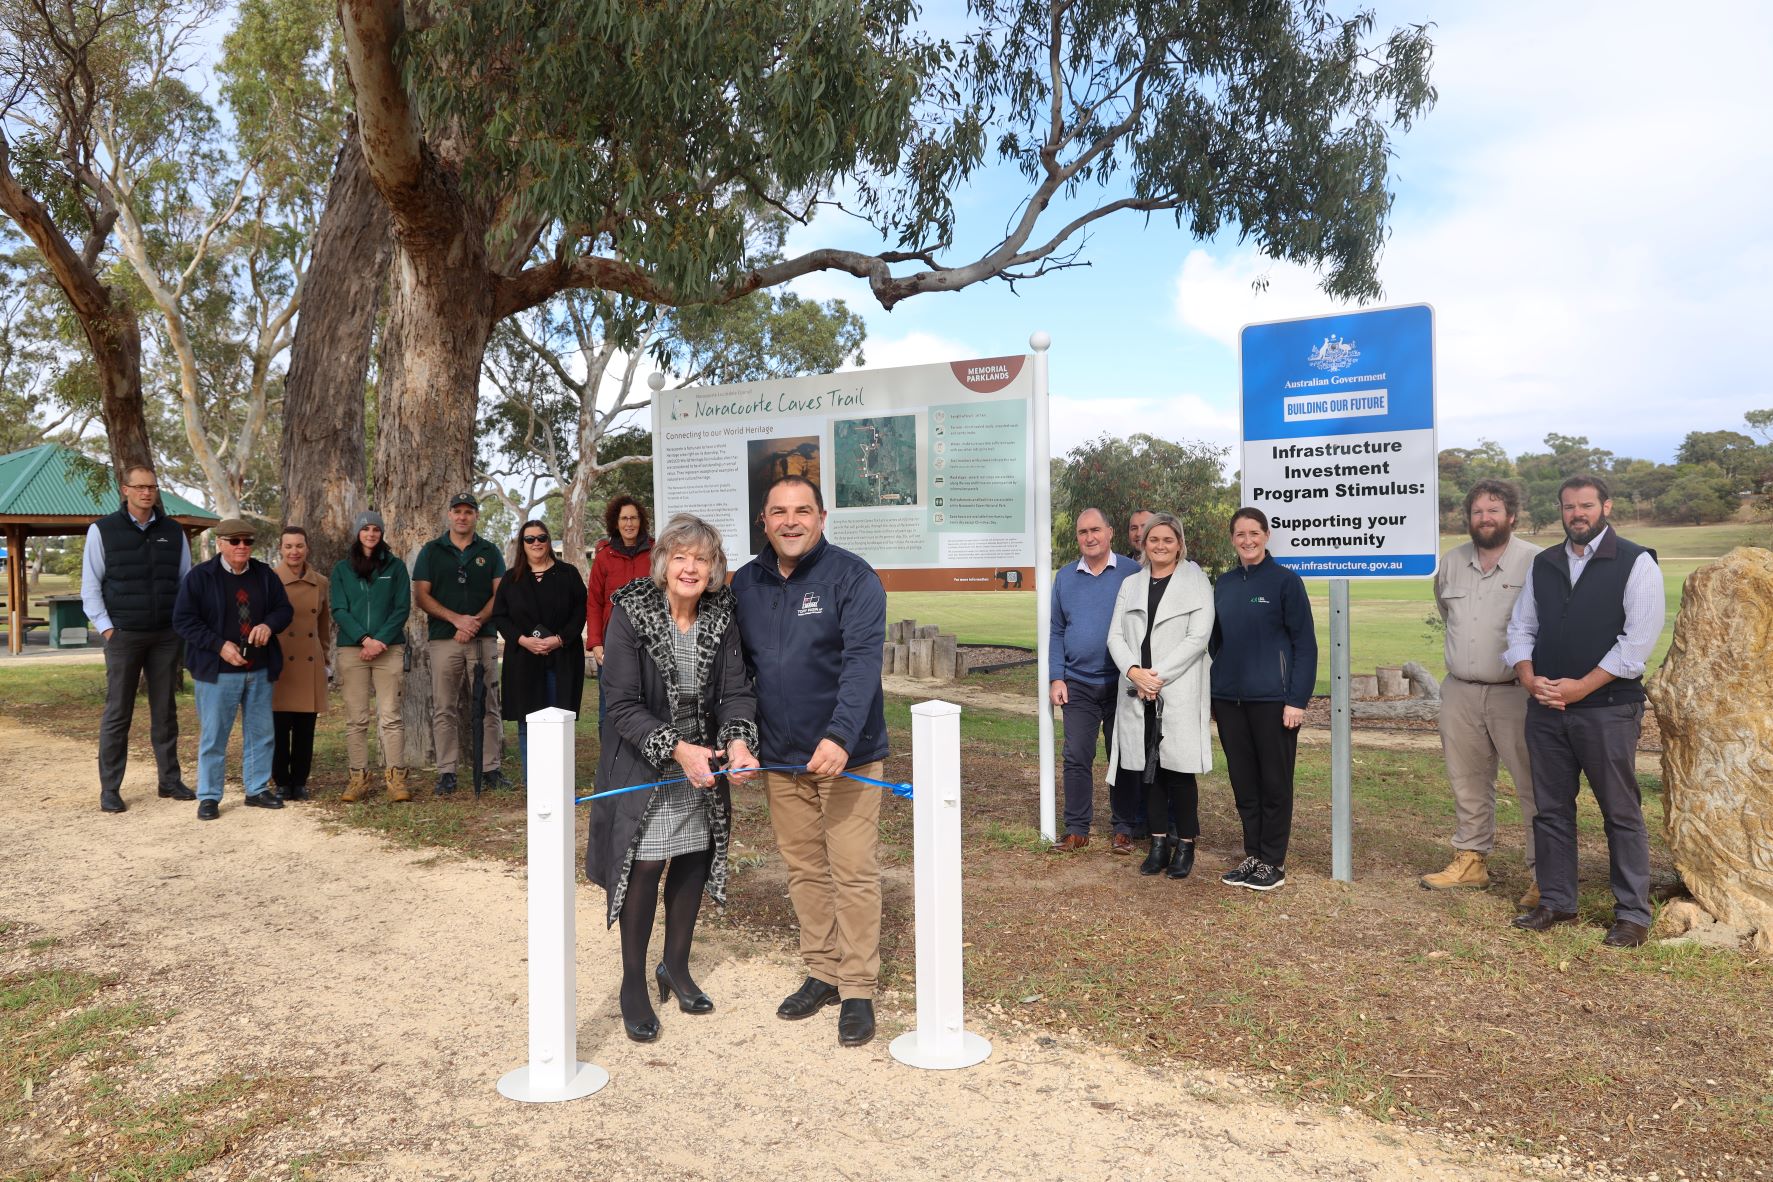 NARACOORTE CAVES TRAIL OFFICIALLY OPEN